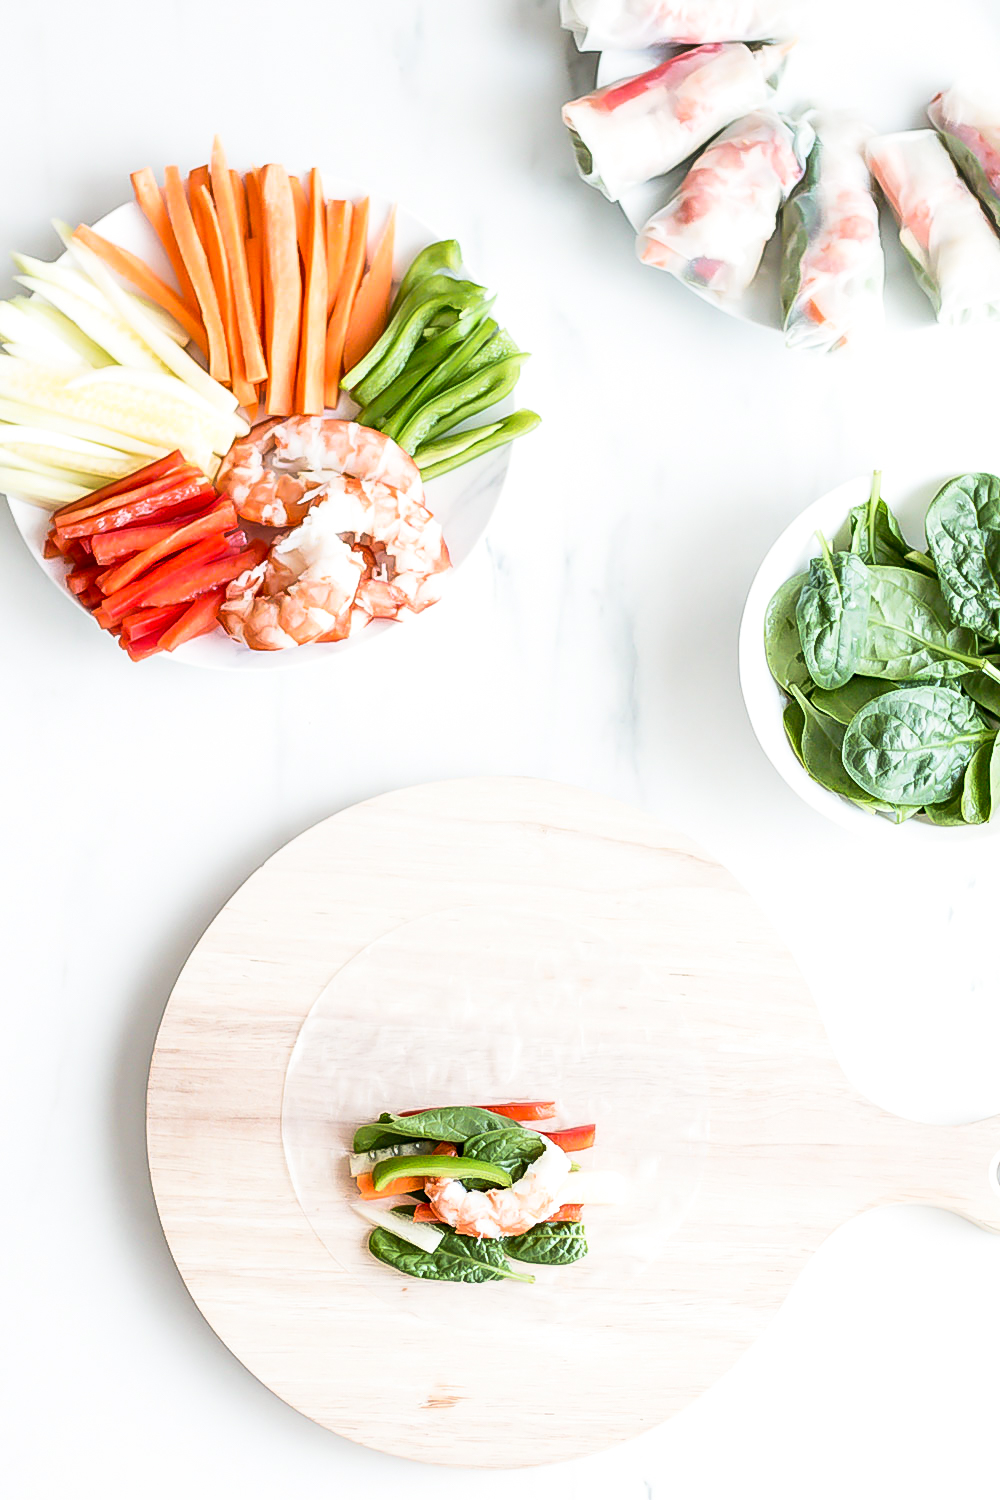 These shrimp summer rolls with sriracha dipping sauce are a good source of dietary fiber and have low fat and calorie content, making them the ideal meal to help you shed excess weight and leave you feeling full for longer. https://www.spotebi.com/recipes/shrimp-summer-rolls/